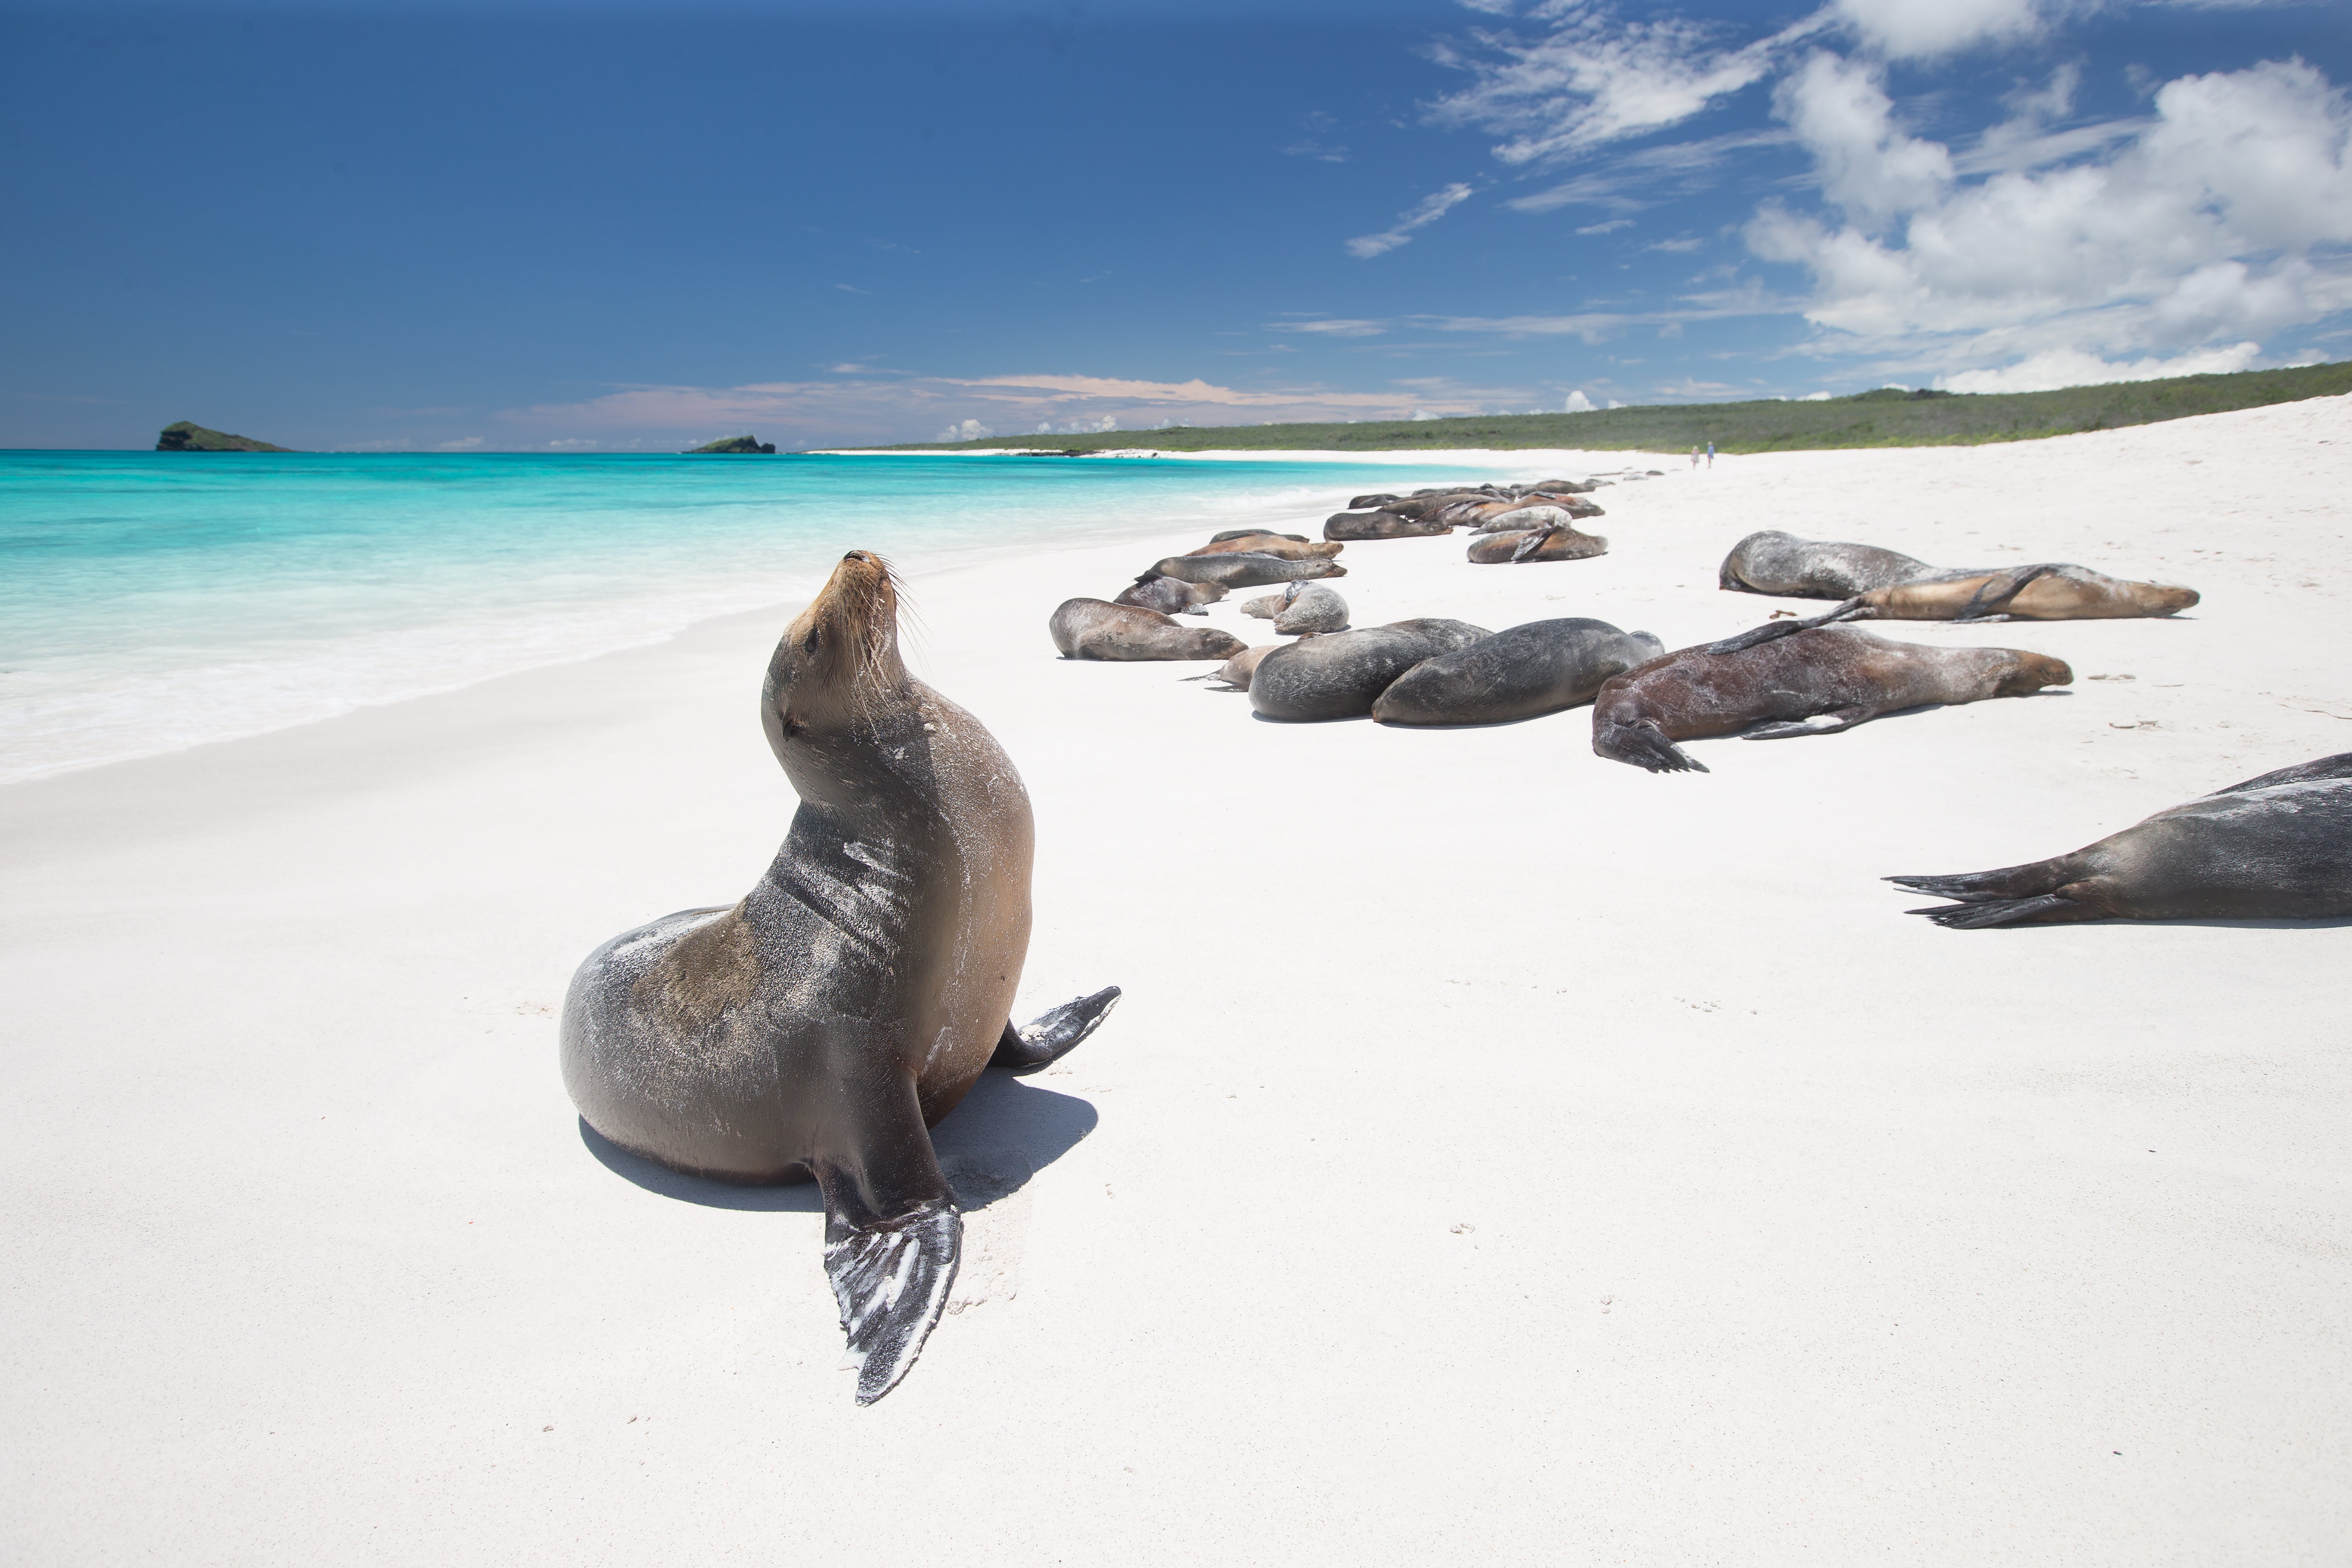 Chill on the beach with the Galapagos sea lions